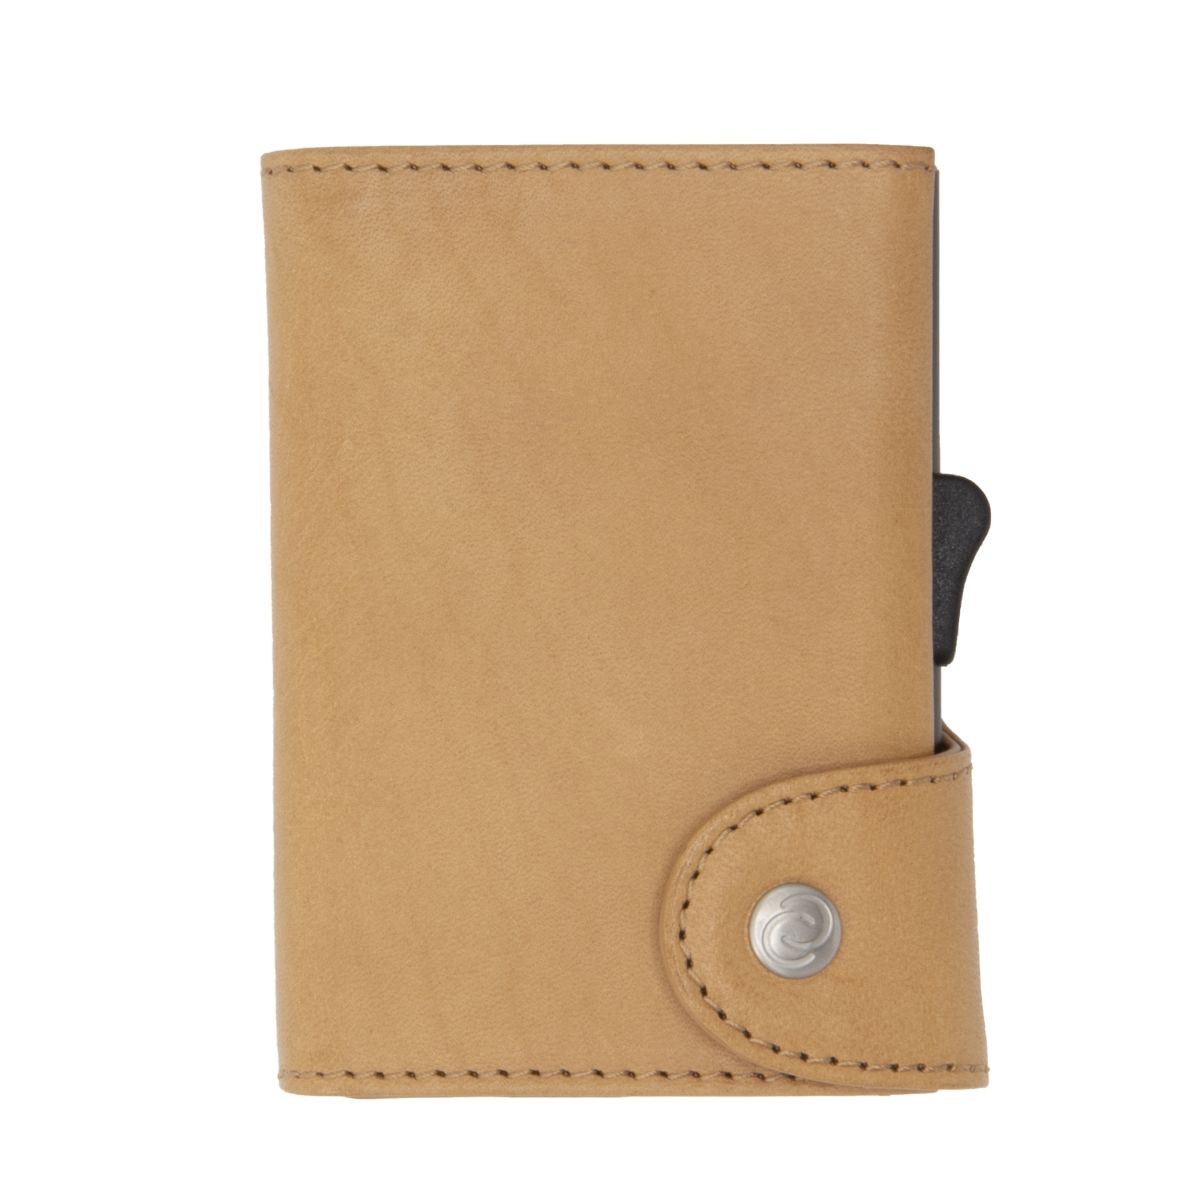 C-Secure XL Aluminum Wallet with Vegetable Genuine Leather - Saddle